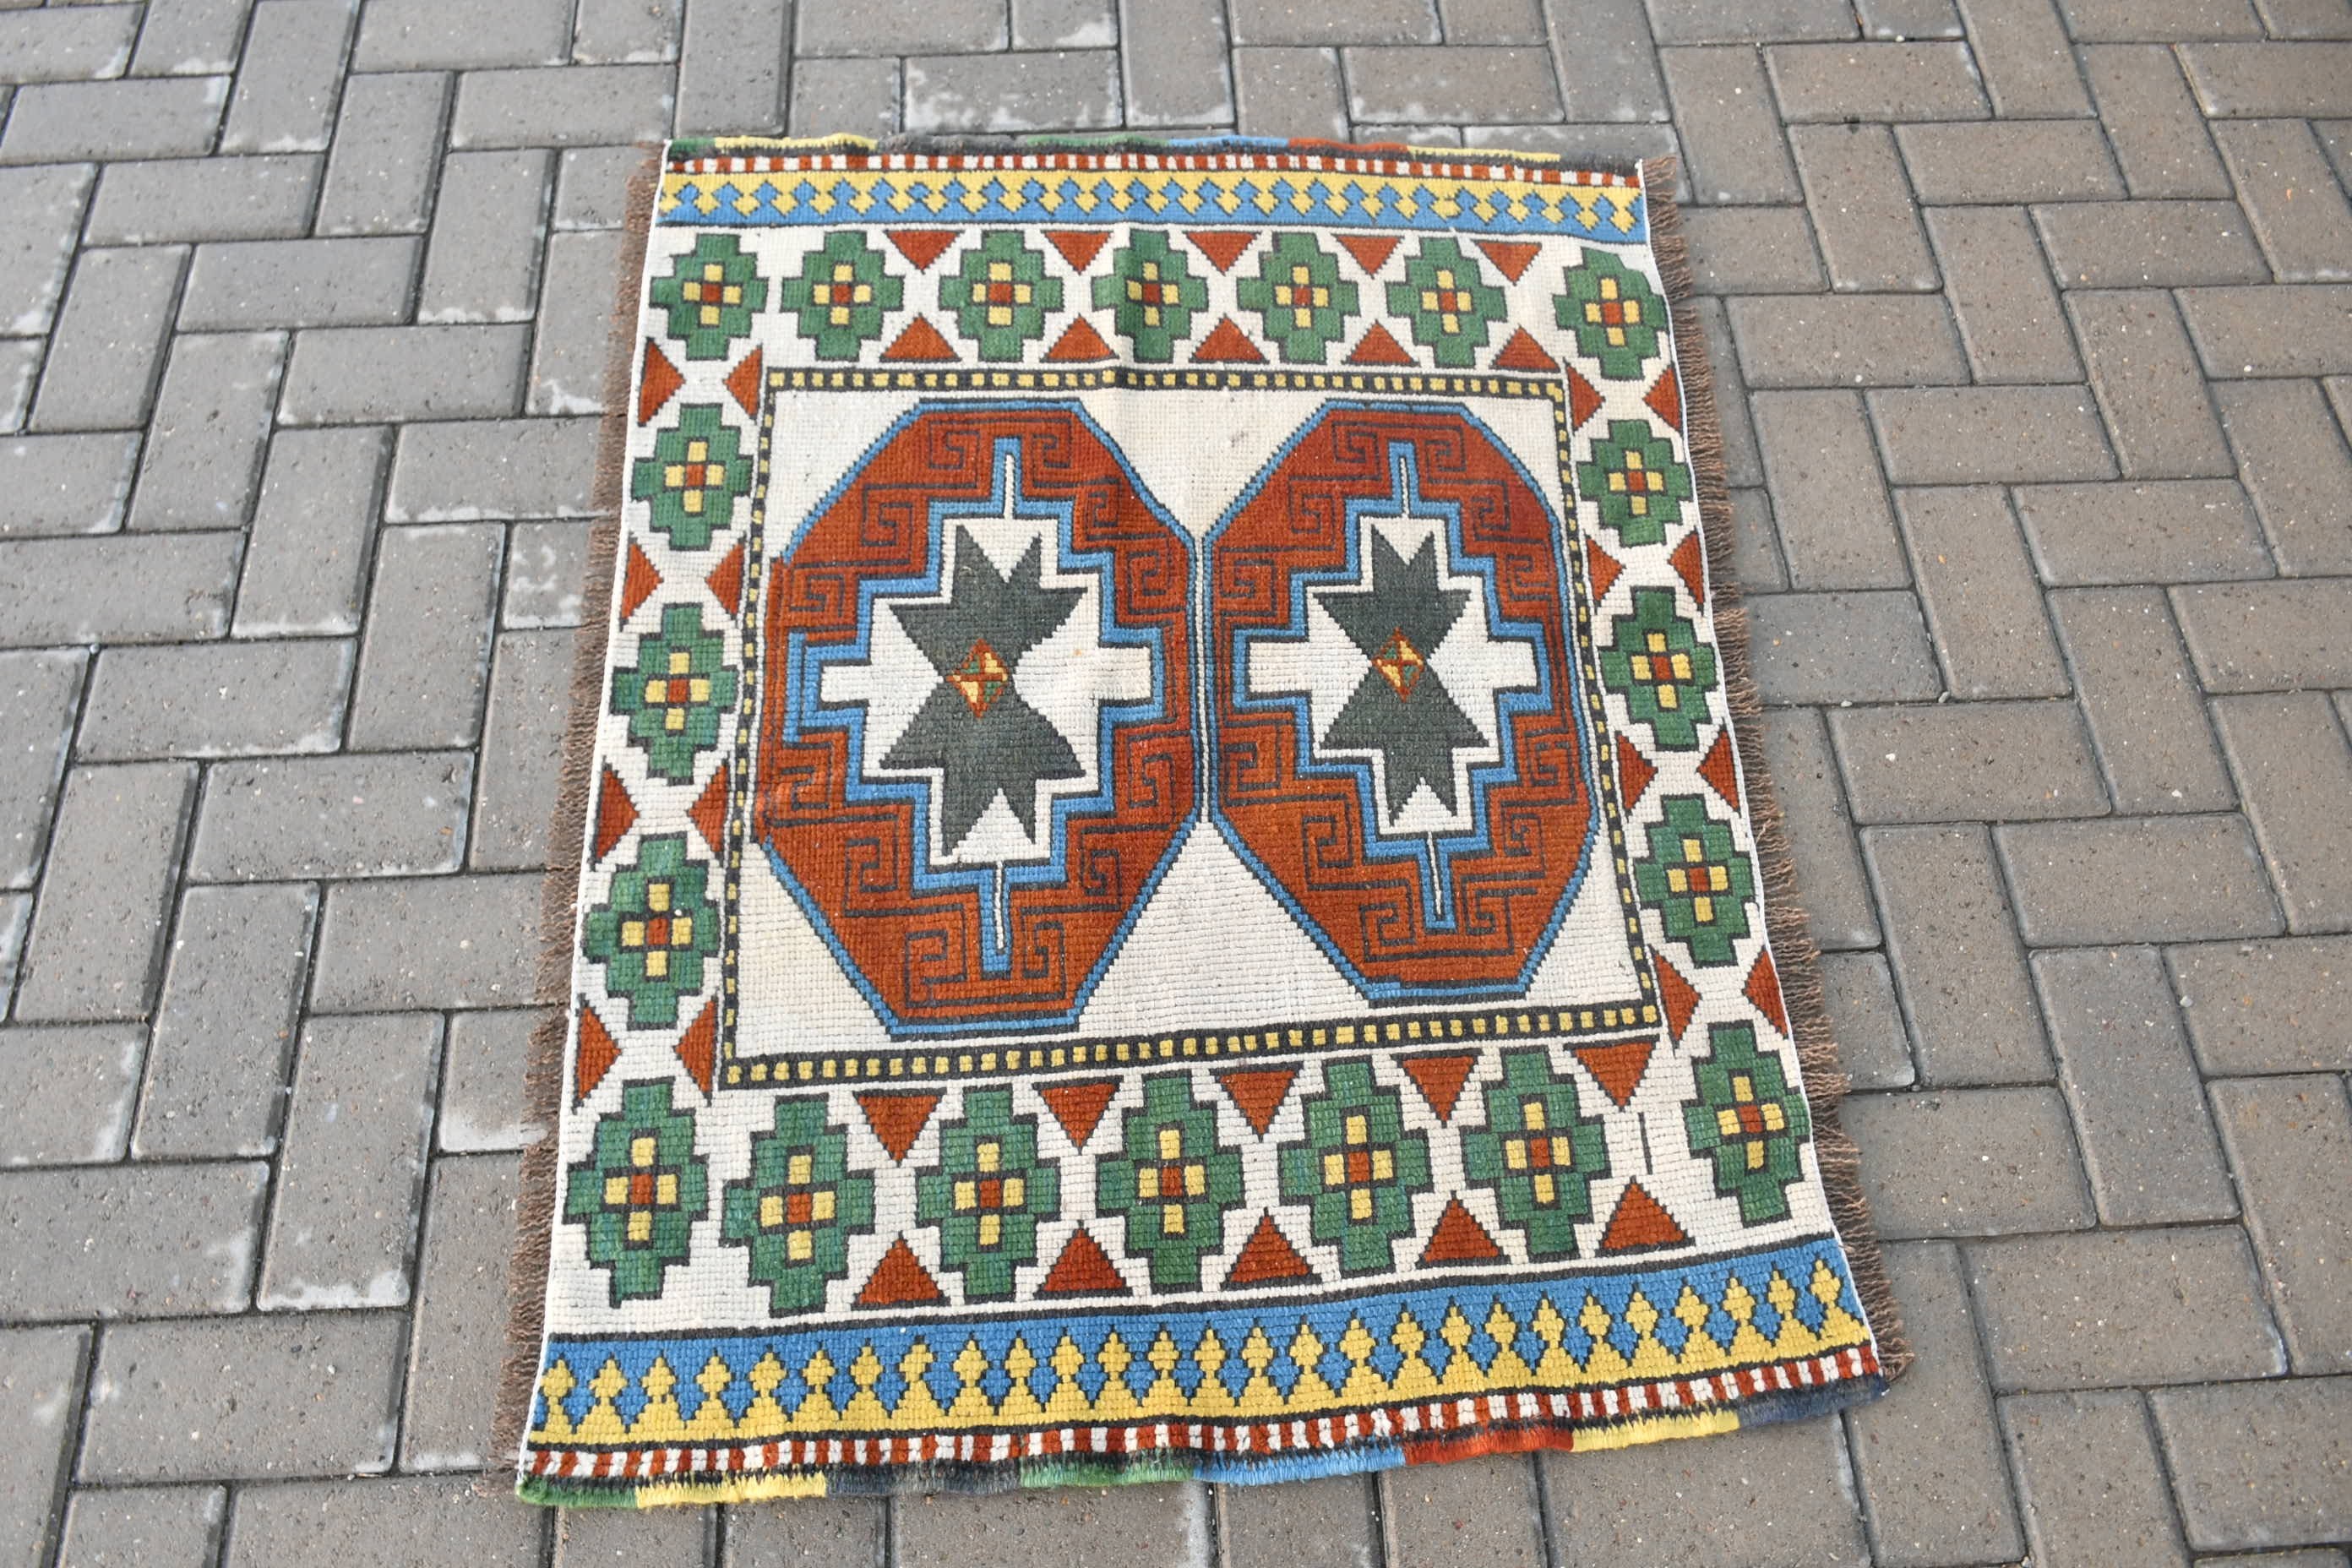 Anatolian Rug, Turkish Rugs, Wool Rug, Vintage Rugs, Entry Rug, Ethnic Rugs, White  3.7x2.8 ft Small Rugs, Car Mat Rugs